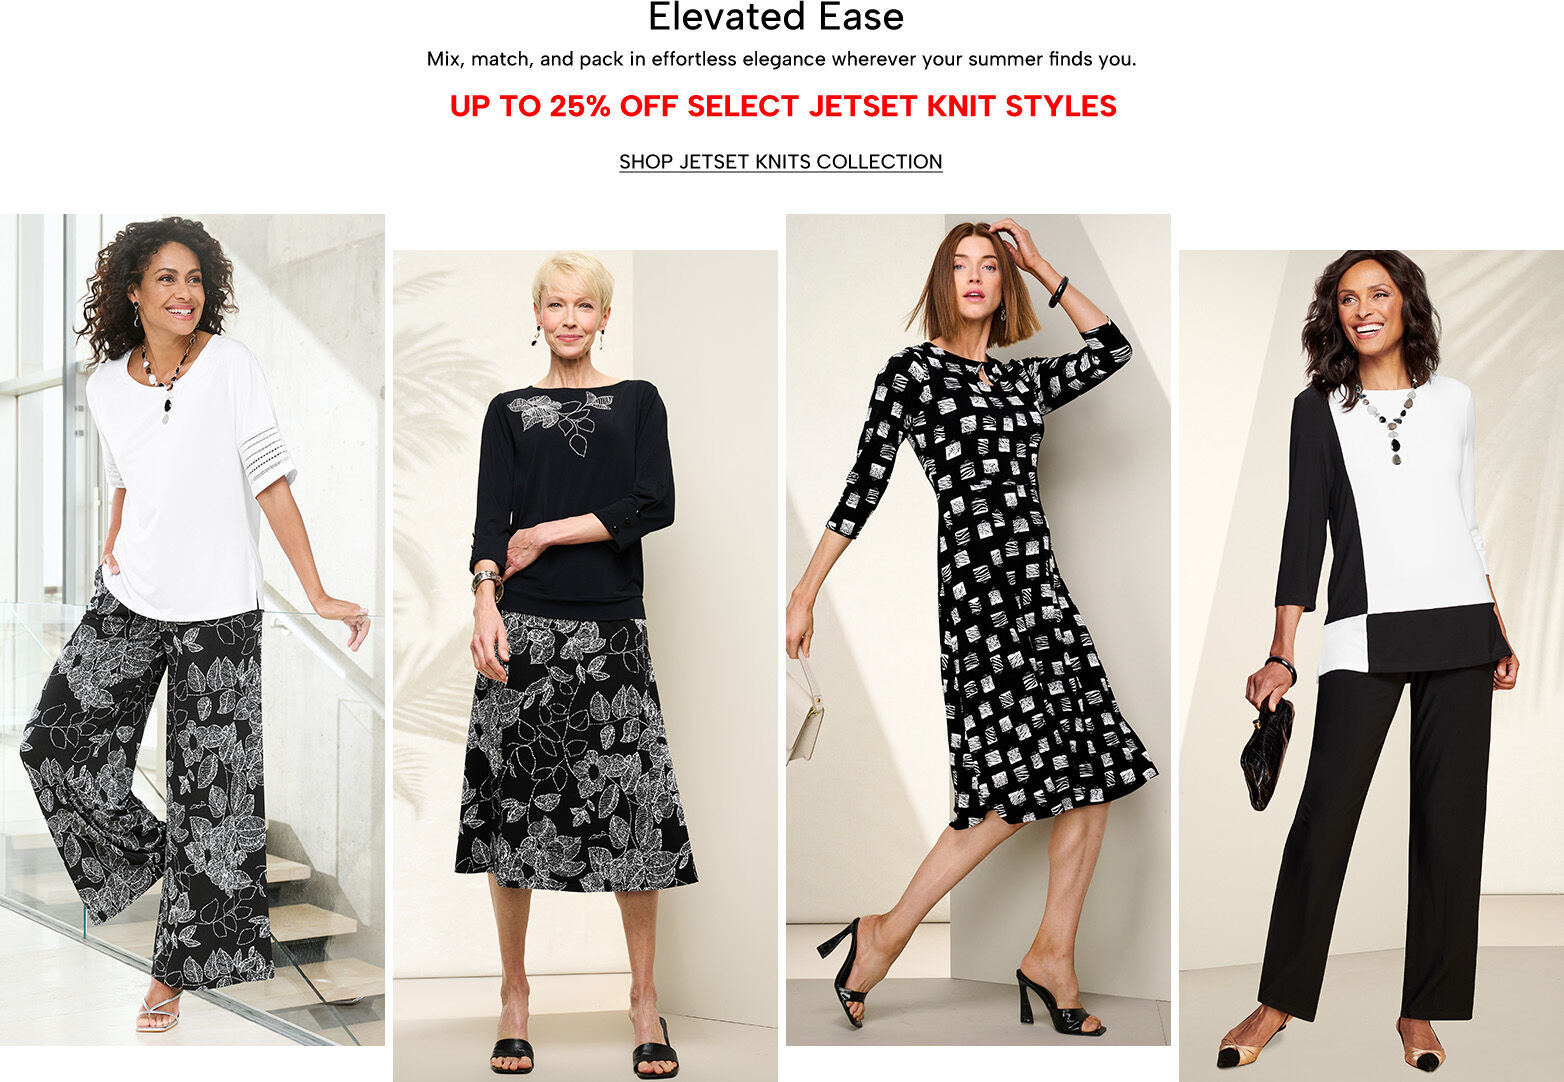 elevated ease mix, match, and pack in effortless elegance wherever your summer finds you. up to 25% off select jetset knit styles shop jetset knits collection